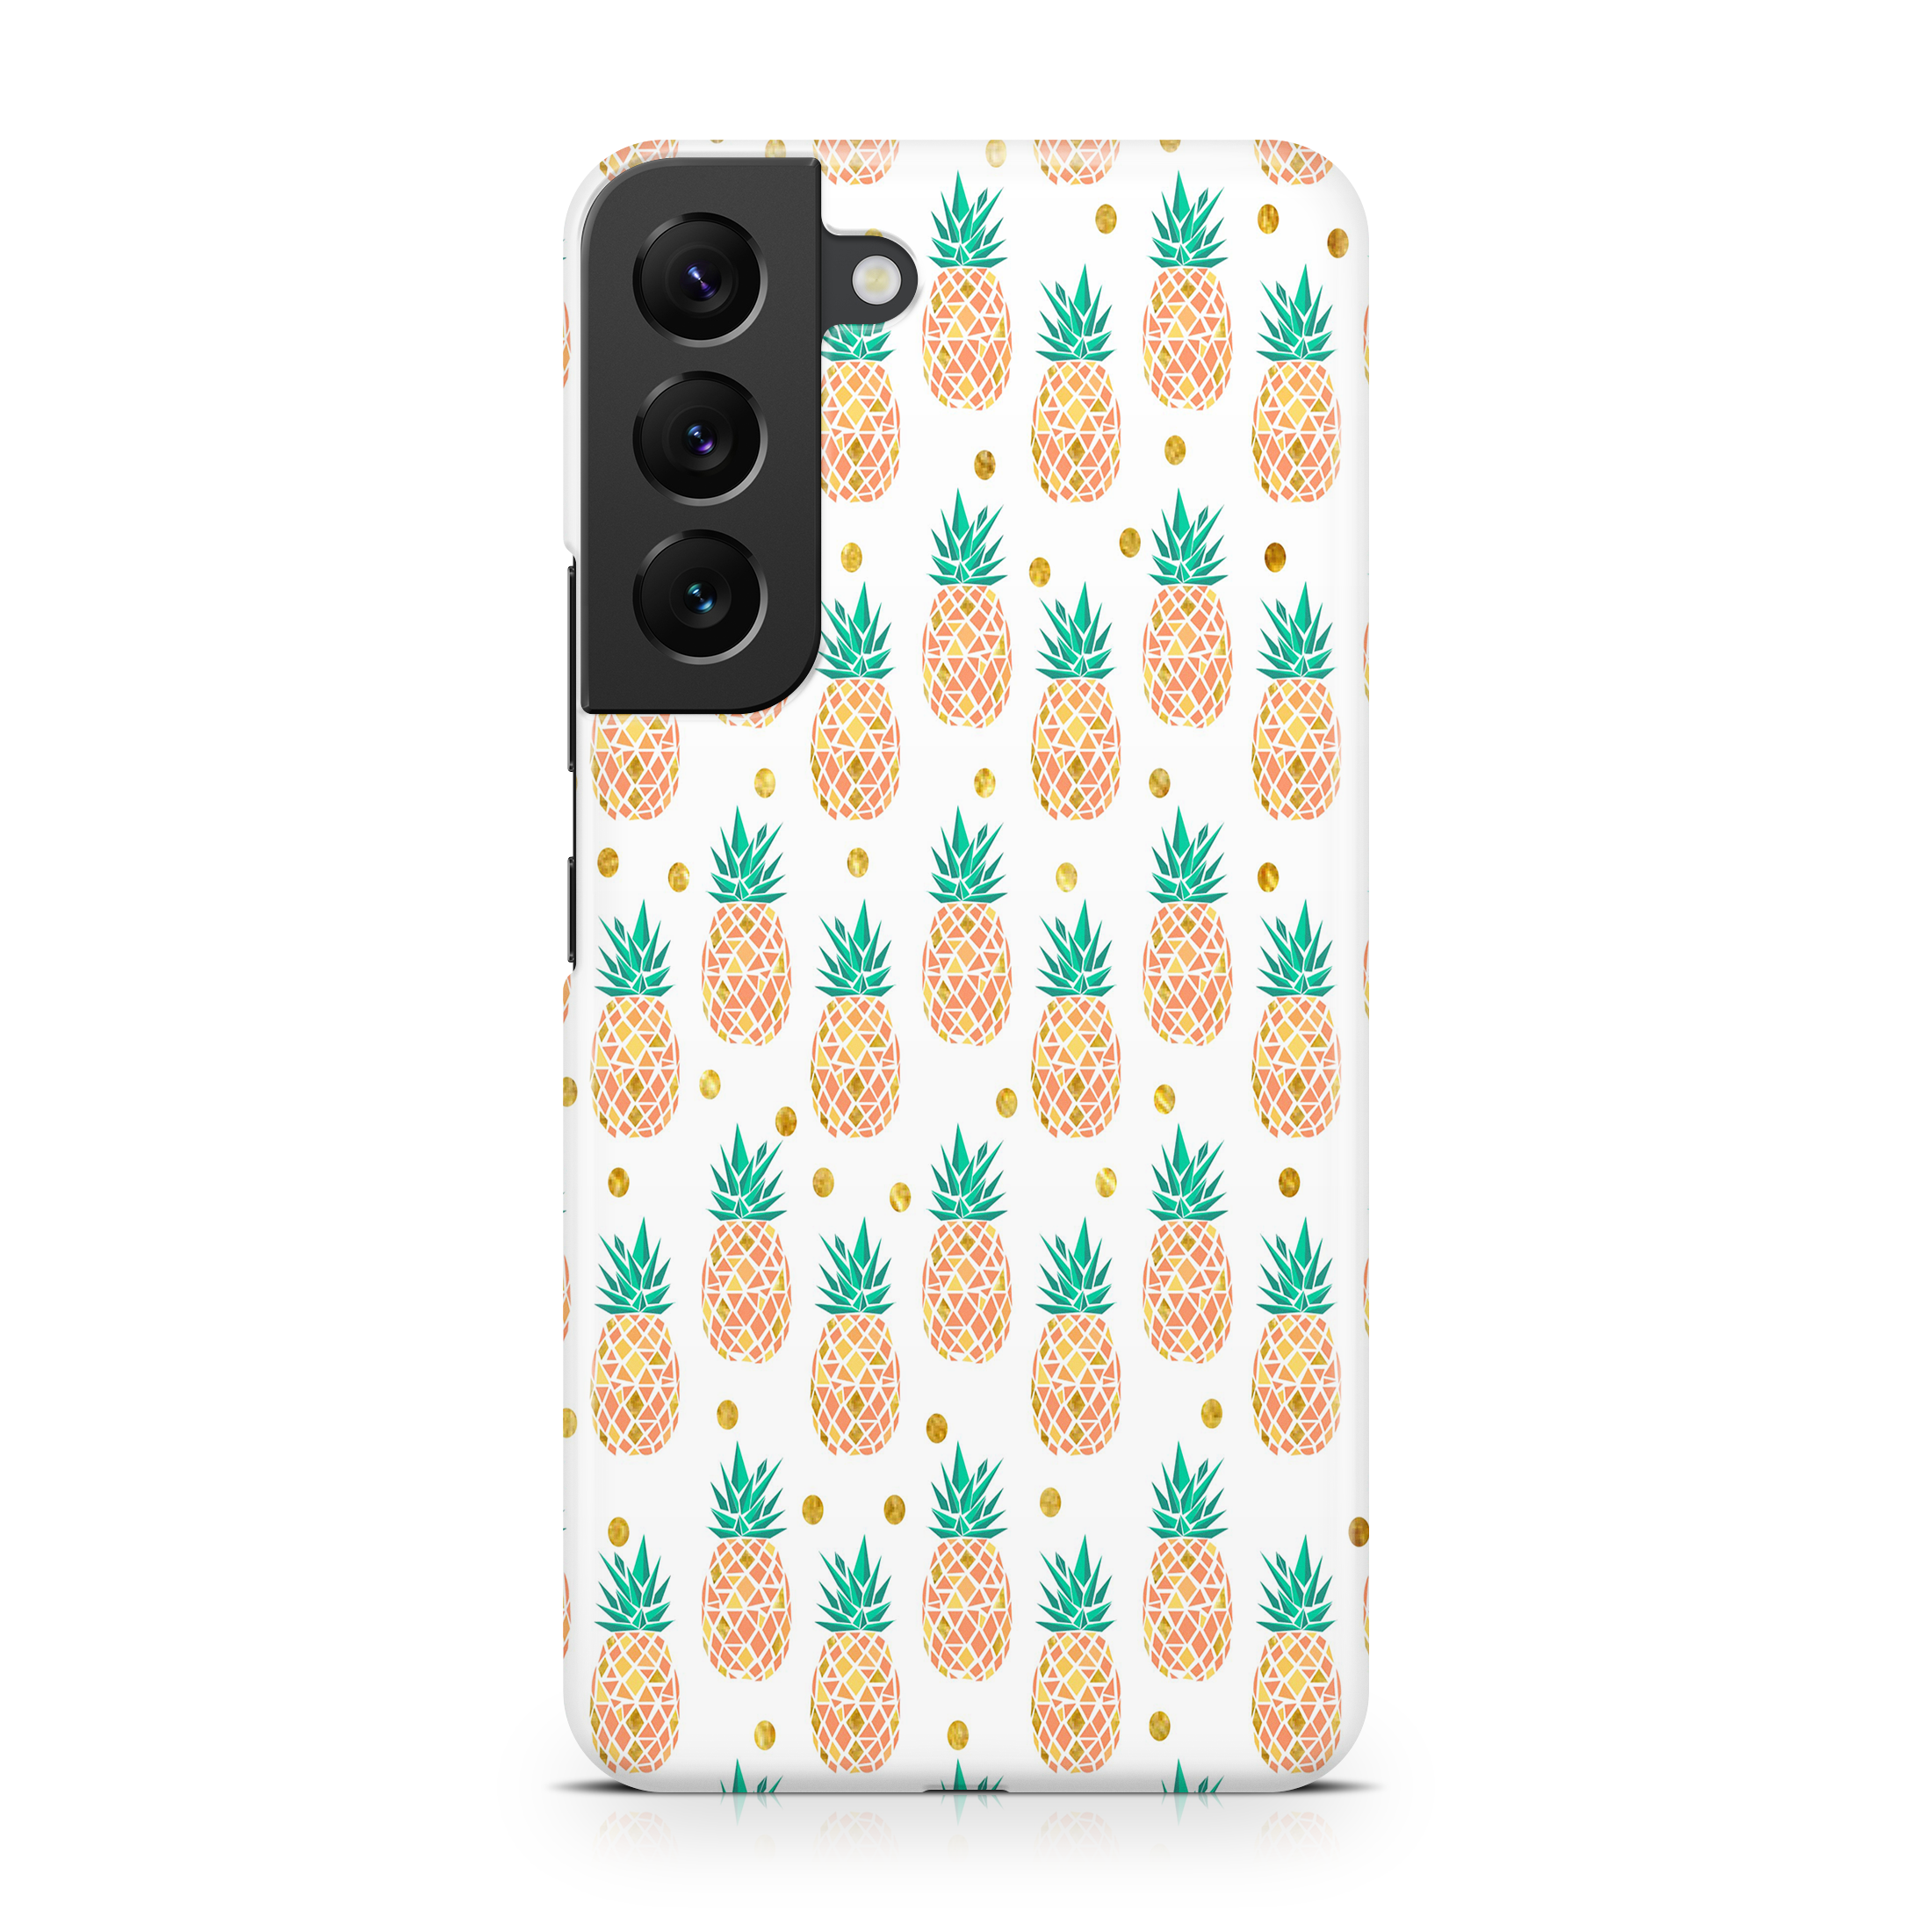 Pineapple Pineapple - Samsung phone case designs by CaseSwagger